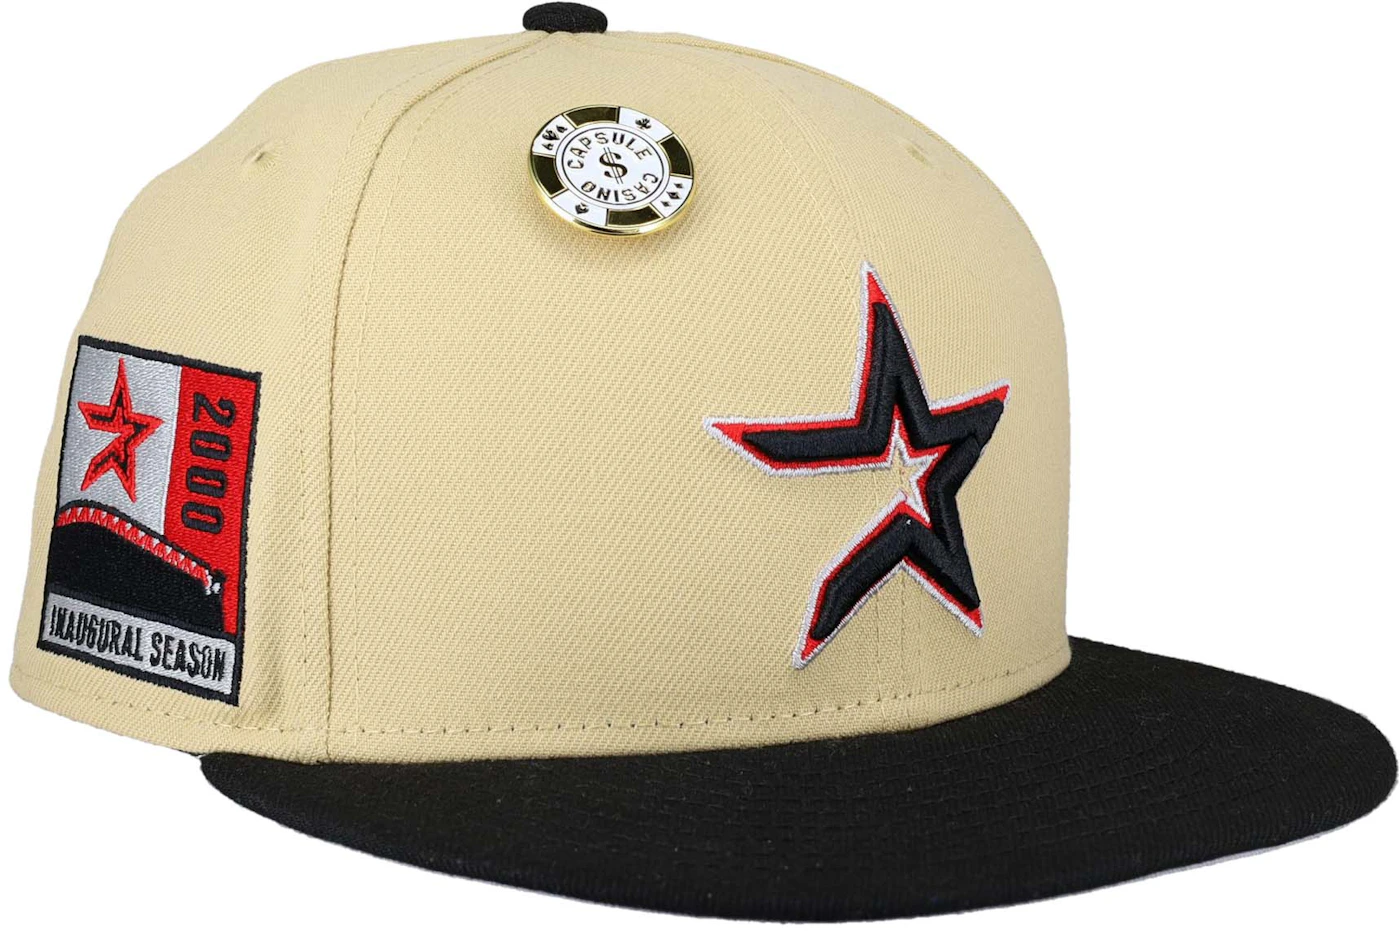 HOUSTON ASTROS Space City Patch Texas Baseball jersey Iron on - HAT PATCH